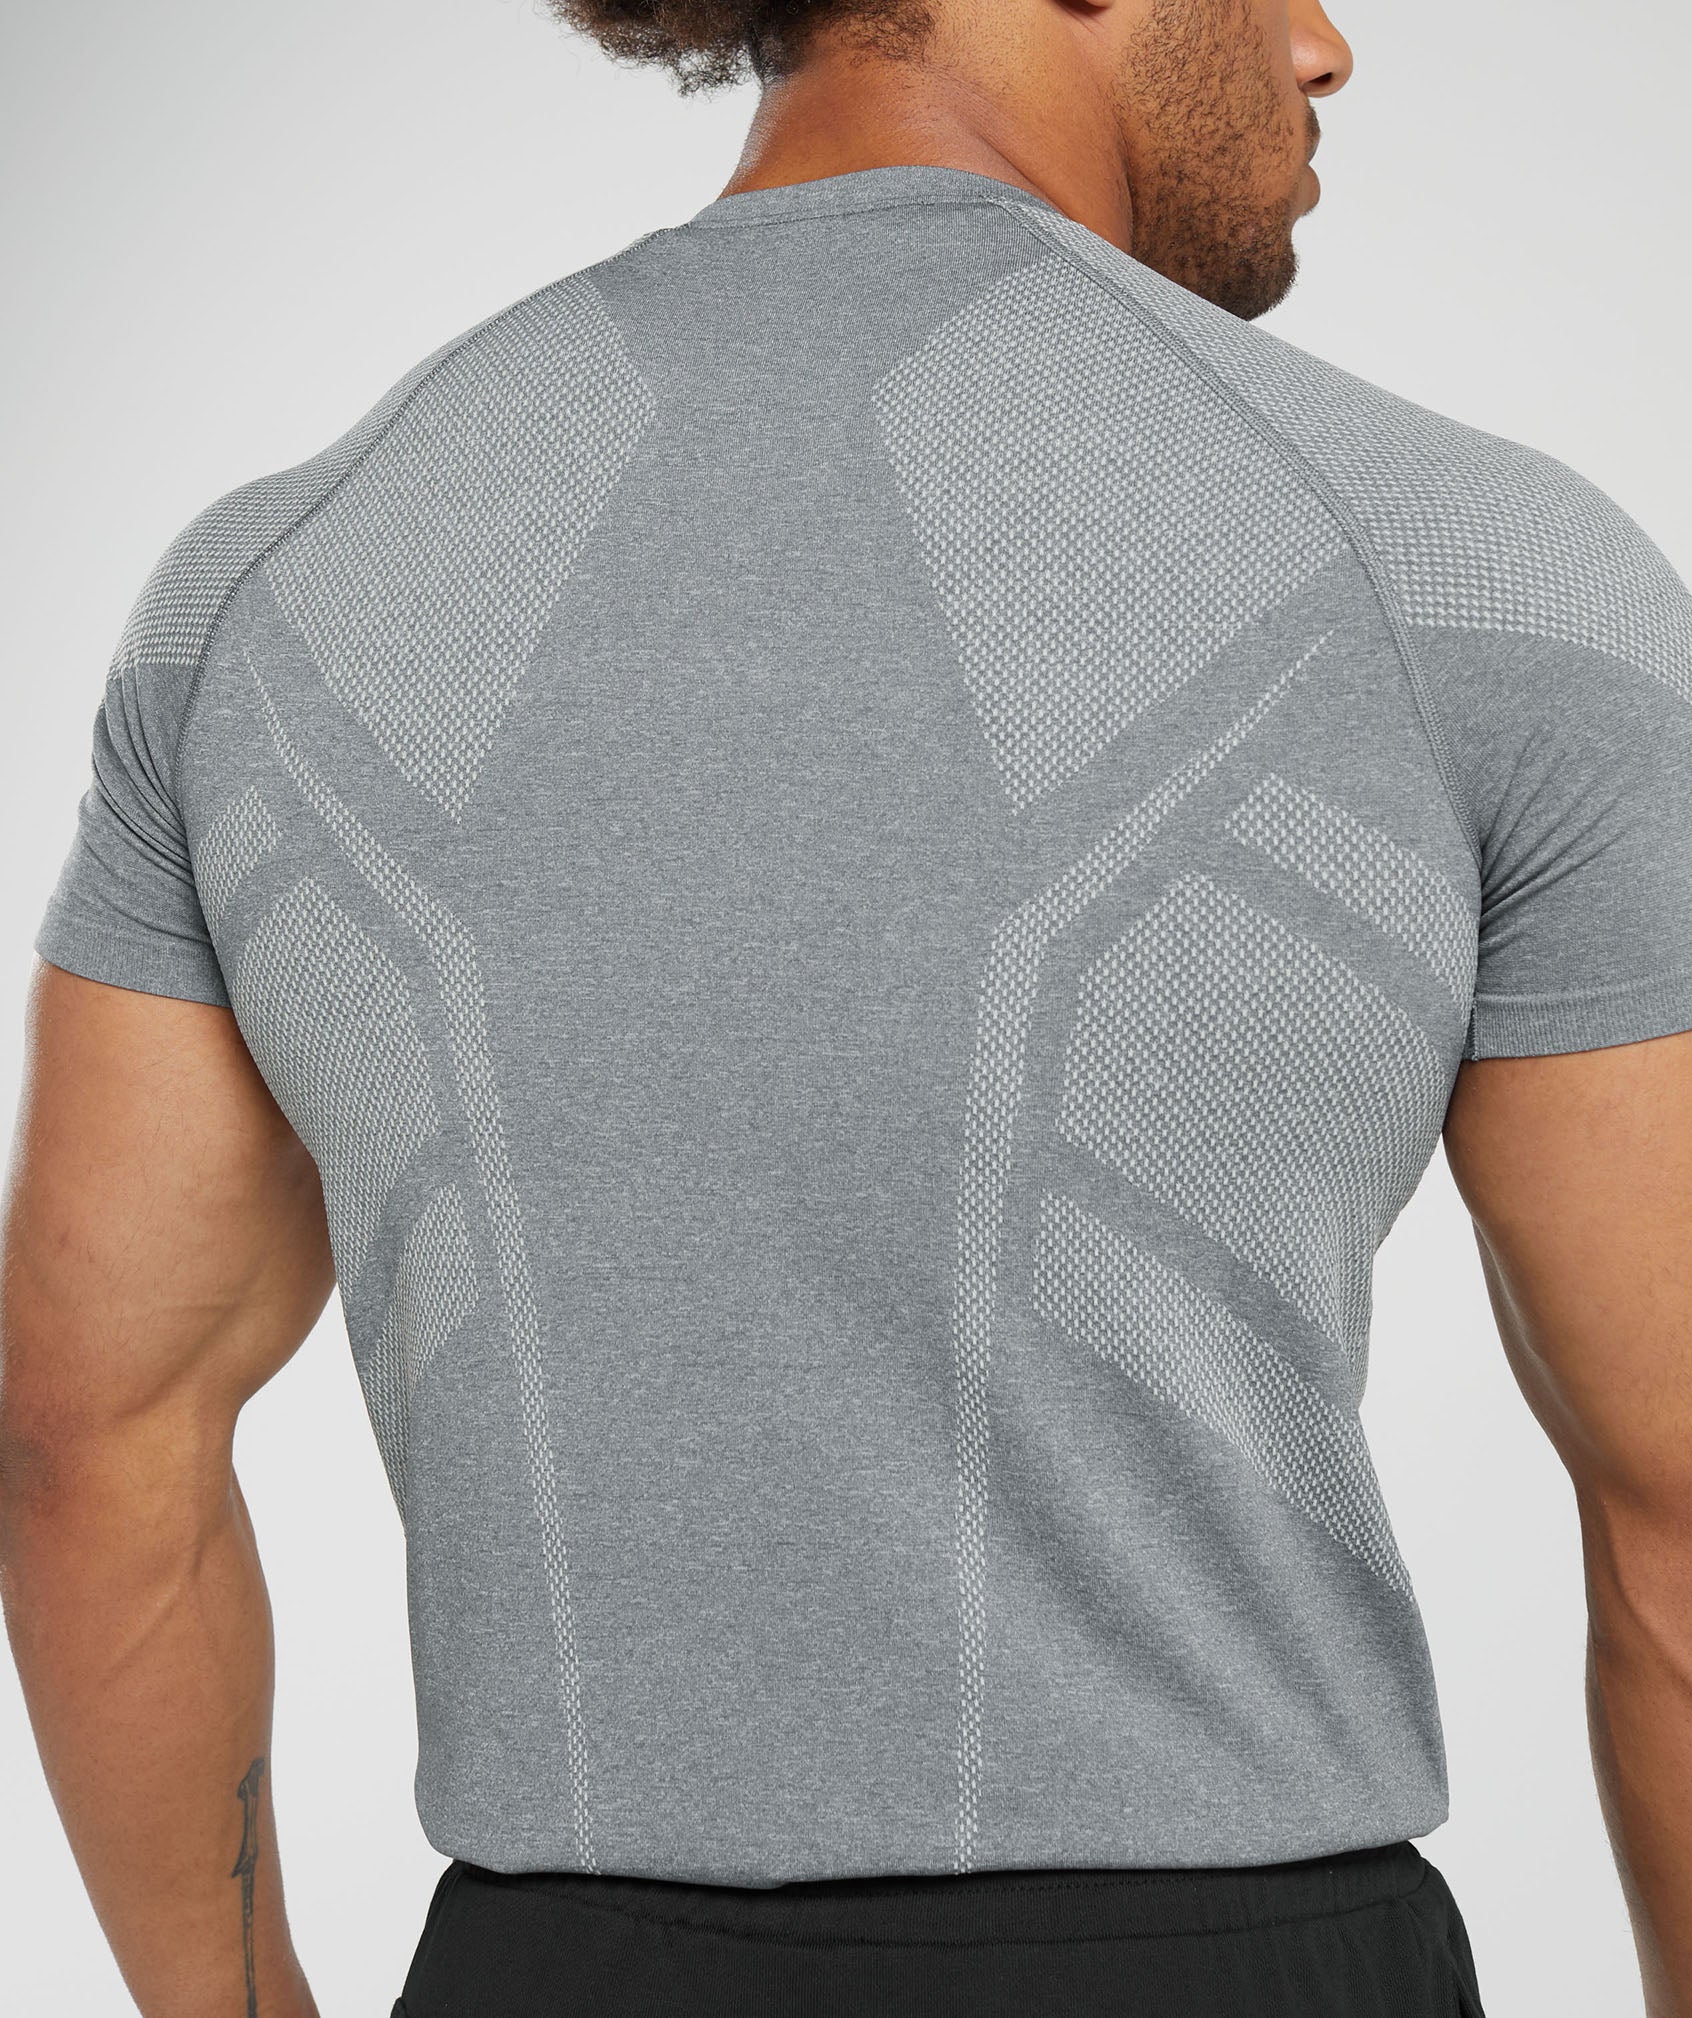 Elite Seamless T-Shirt in Pitch Grey/Light Grey - view 5